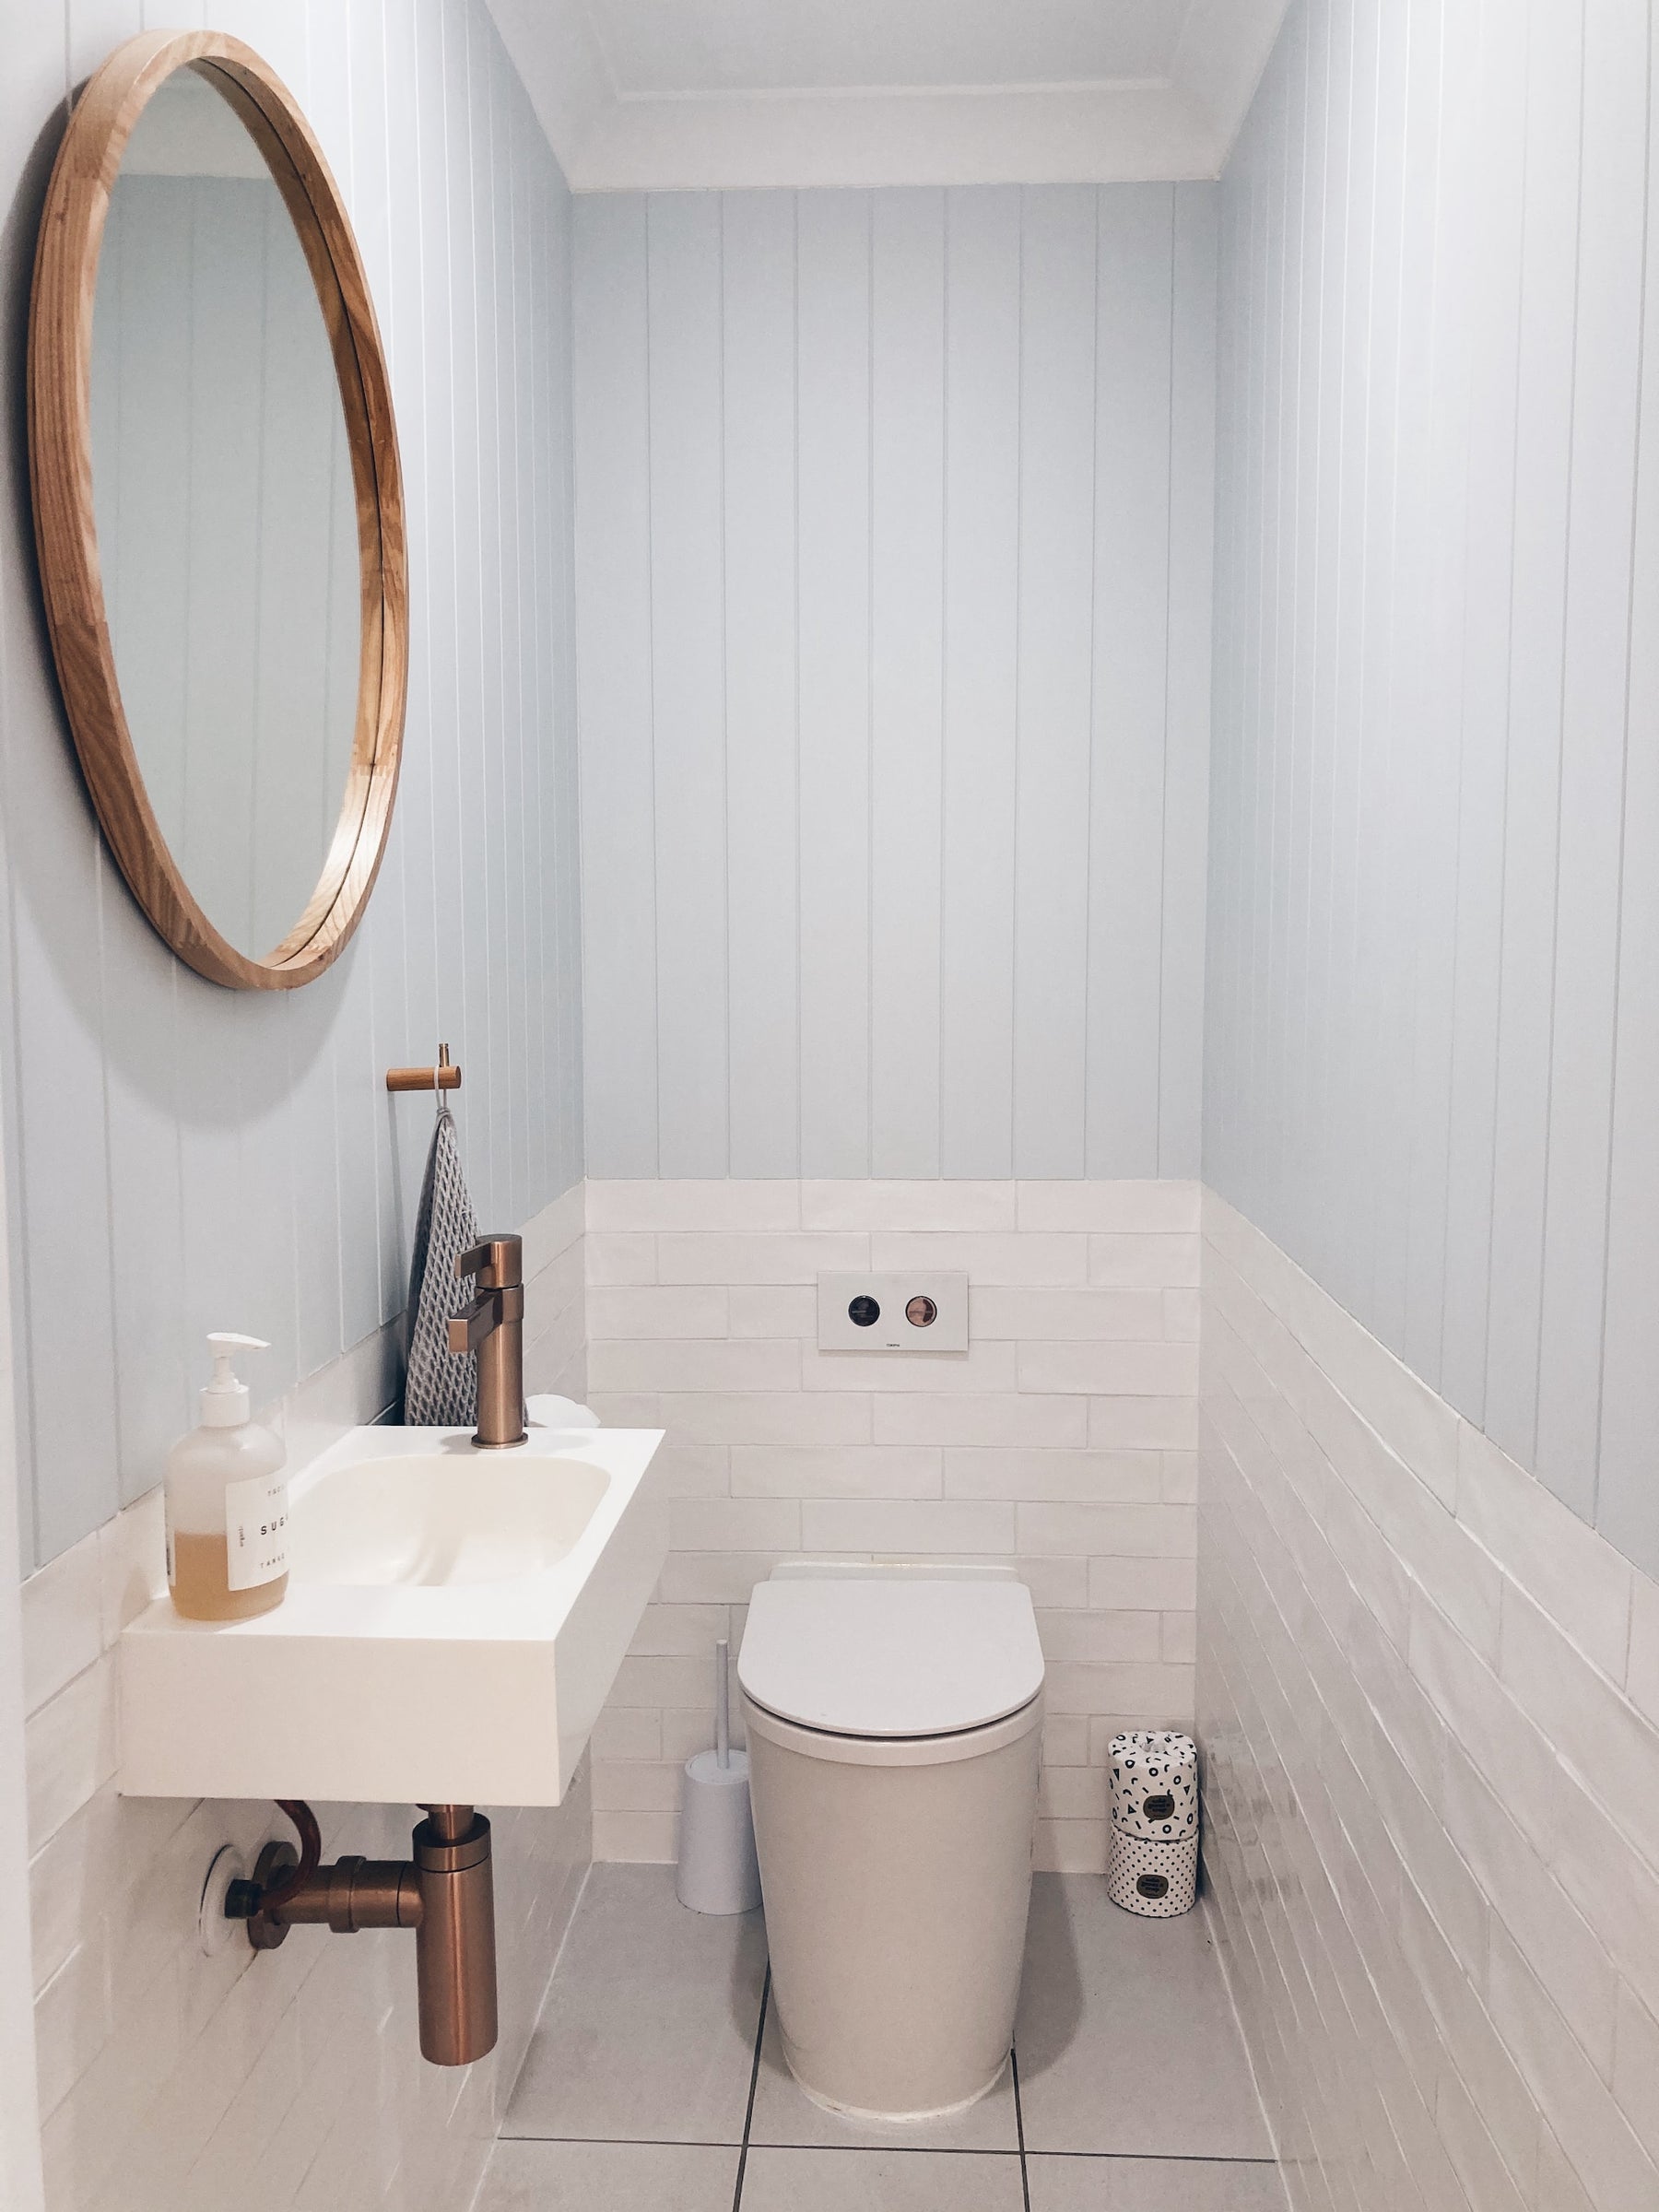 Make The Most of Your Cloakroom with These Small Traditional Bathroom Ideas